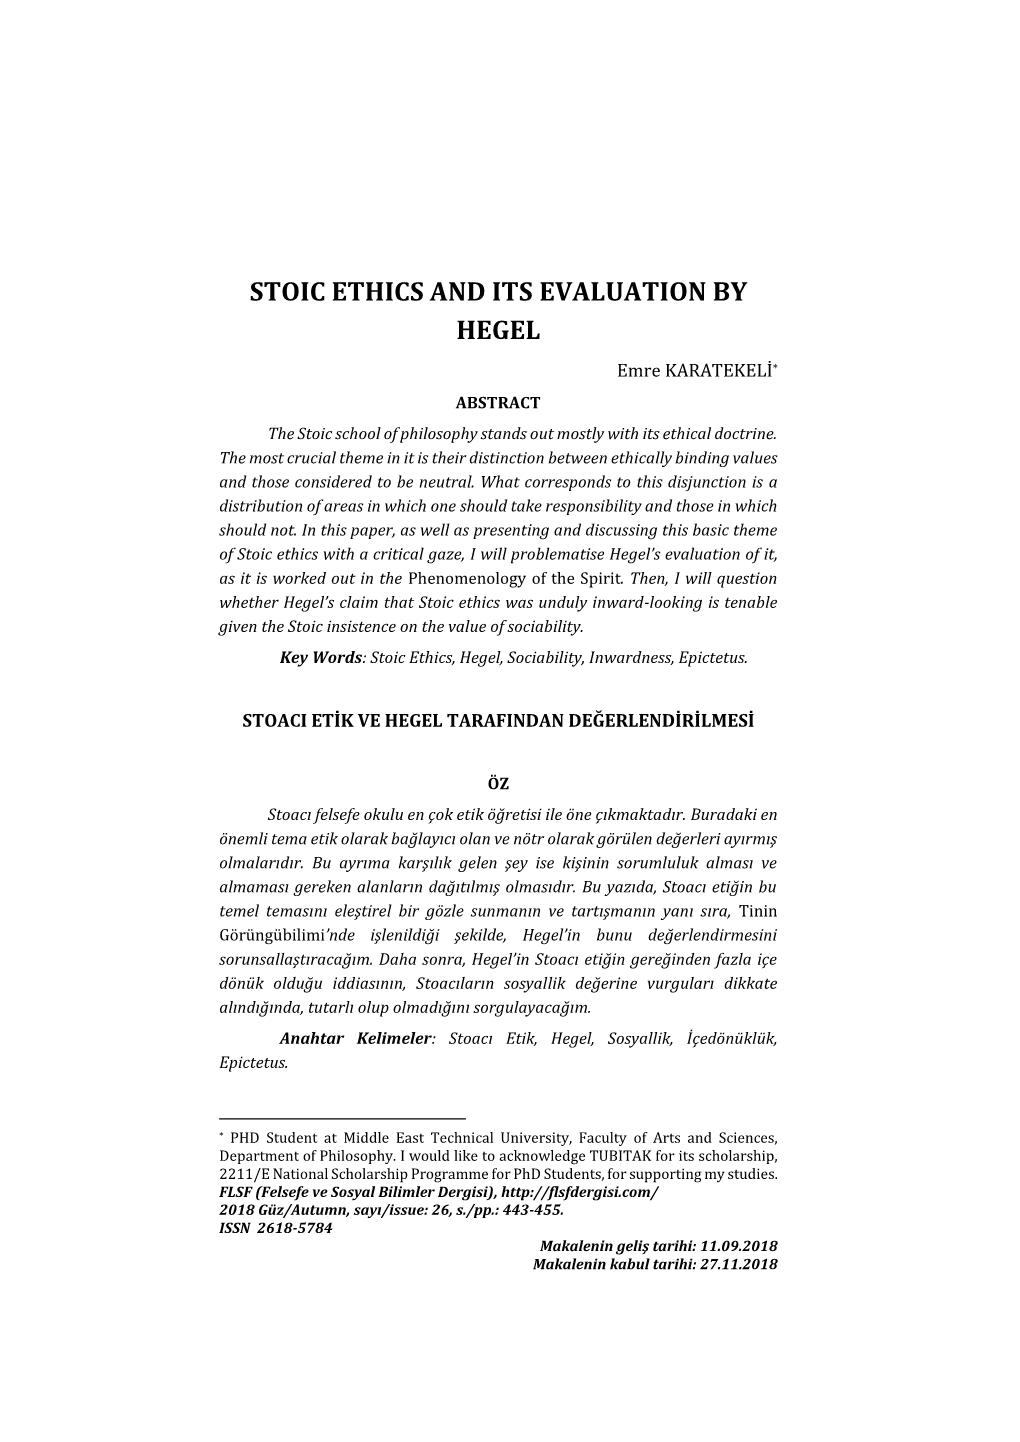 Stoic Ethics and Its Evaluation by Hegel